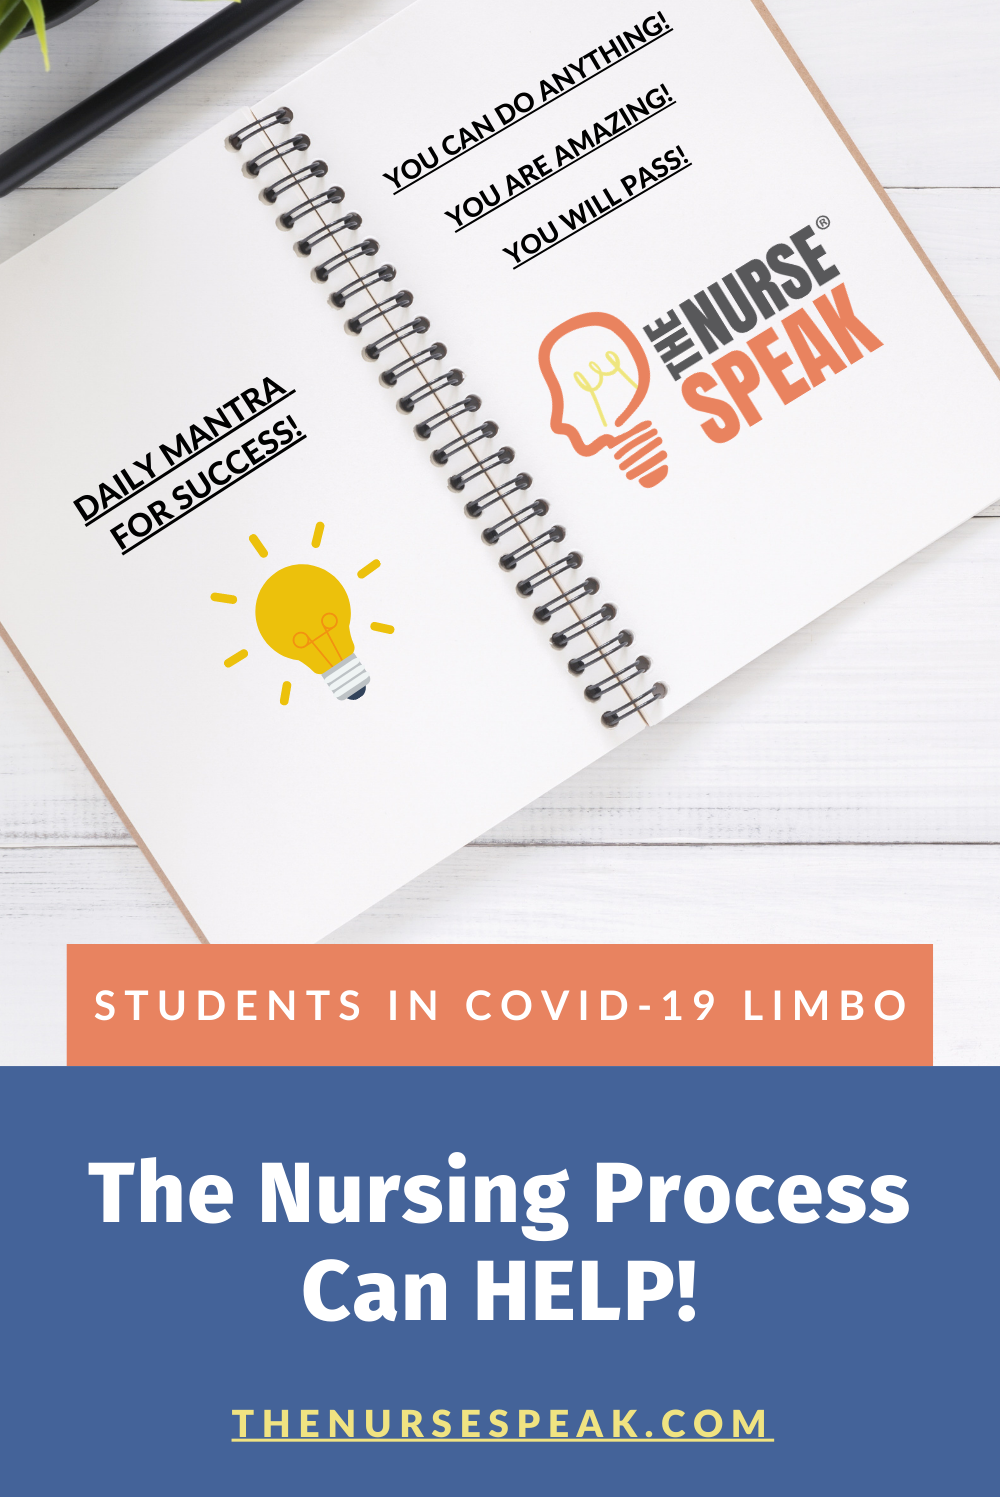 All Nursing Students in COVID-19 Limbo: The Nursing Process Can Help!